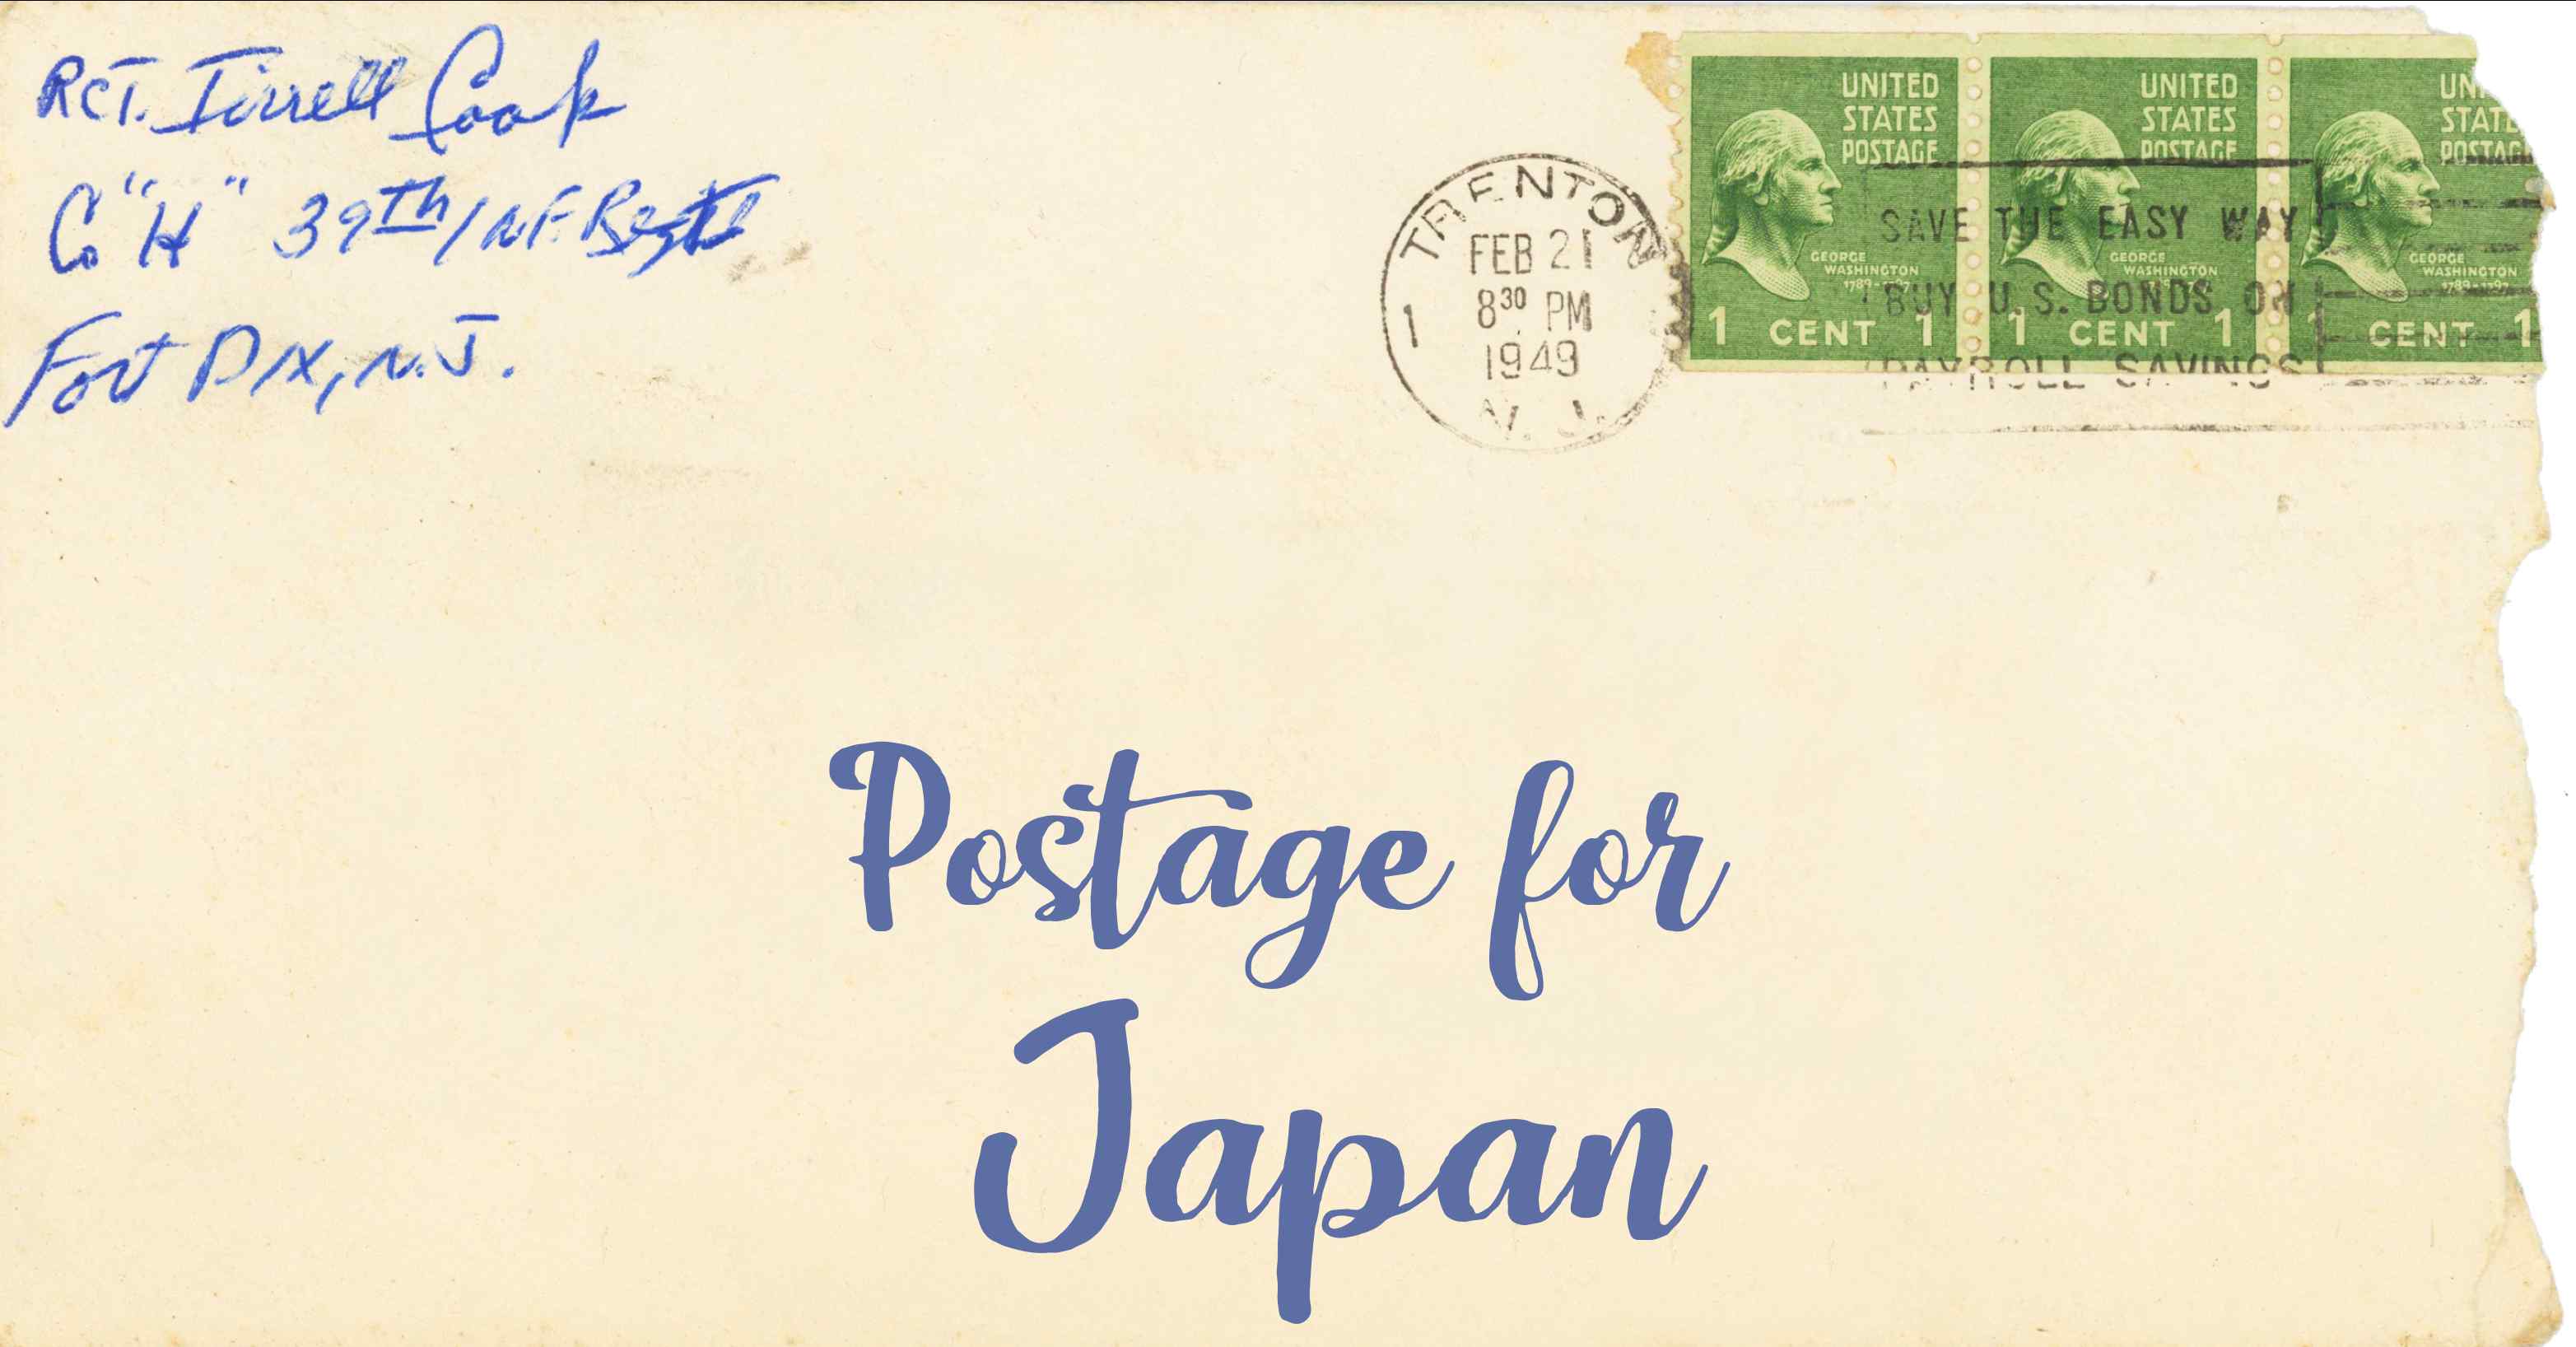 How much does it cost to send a letter to China with a regular envelope?  Can I just use one global stamp from USPS? - Quora